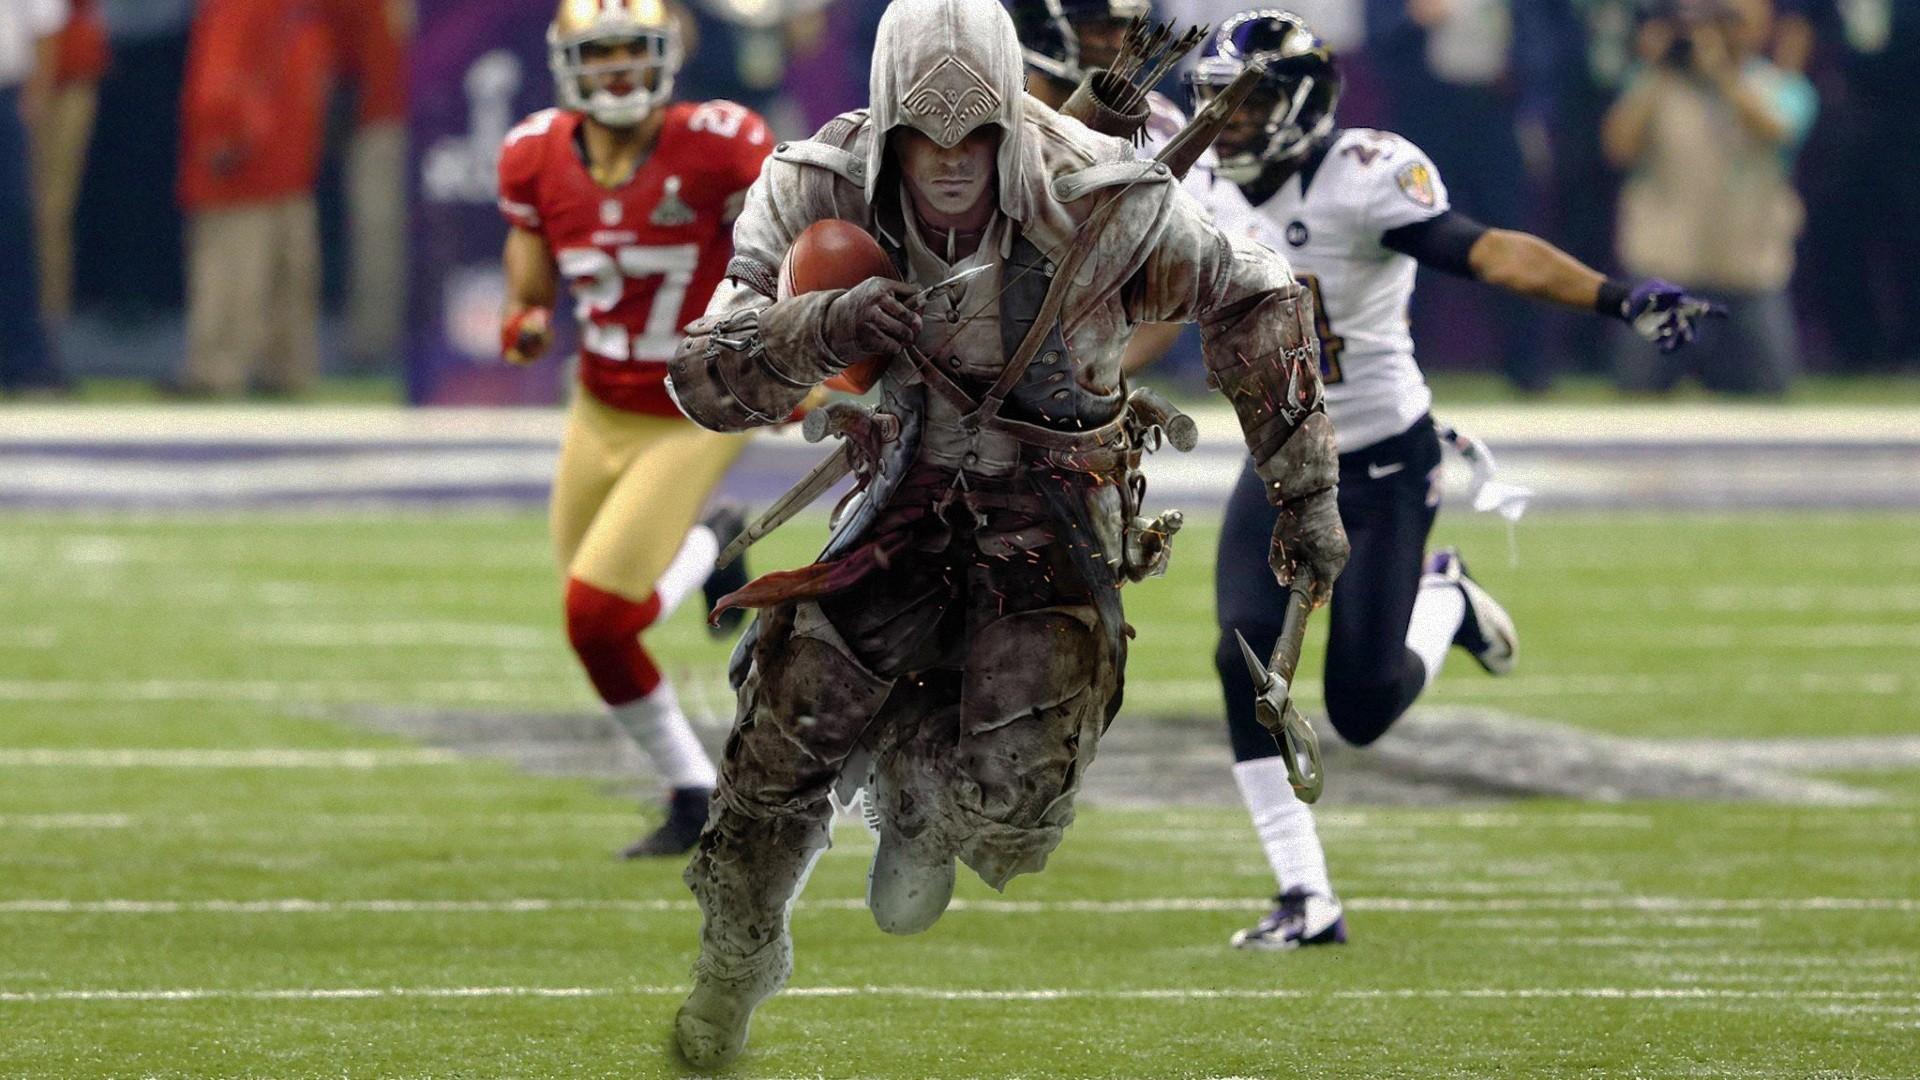 Sports funny american football 3 connor kenway wallpaper 70941